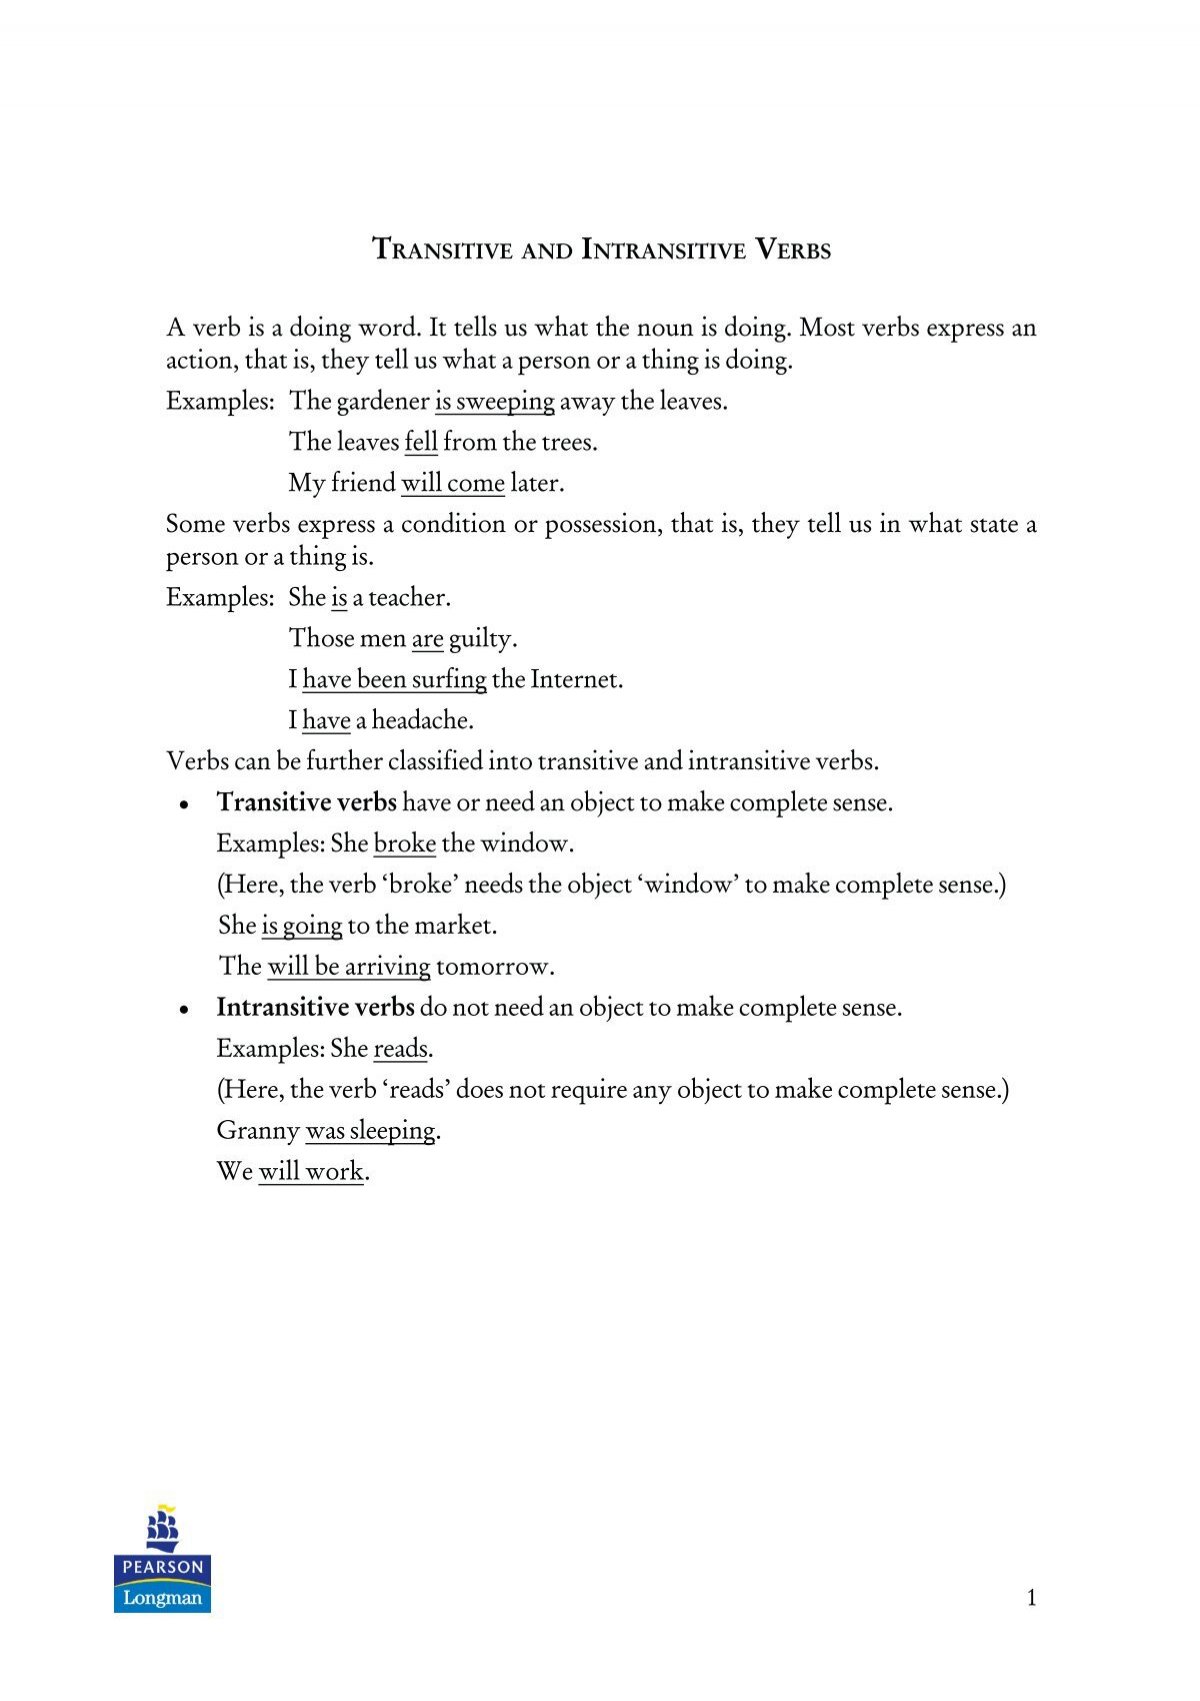 transitive-and-intransitive-verbs-pdf-pearson